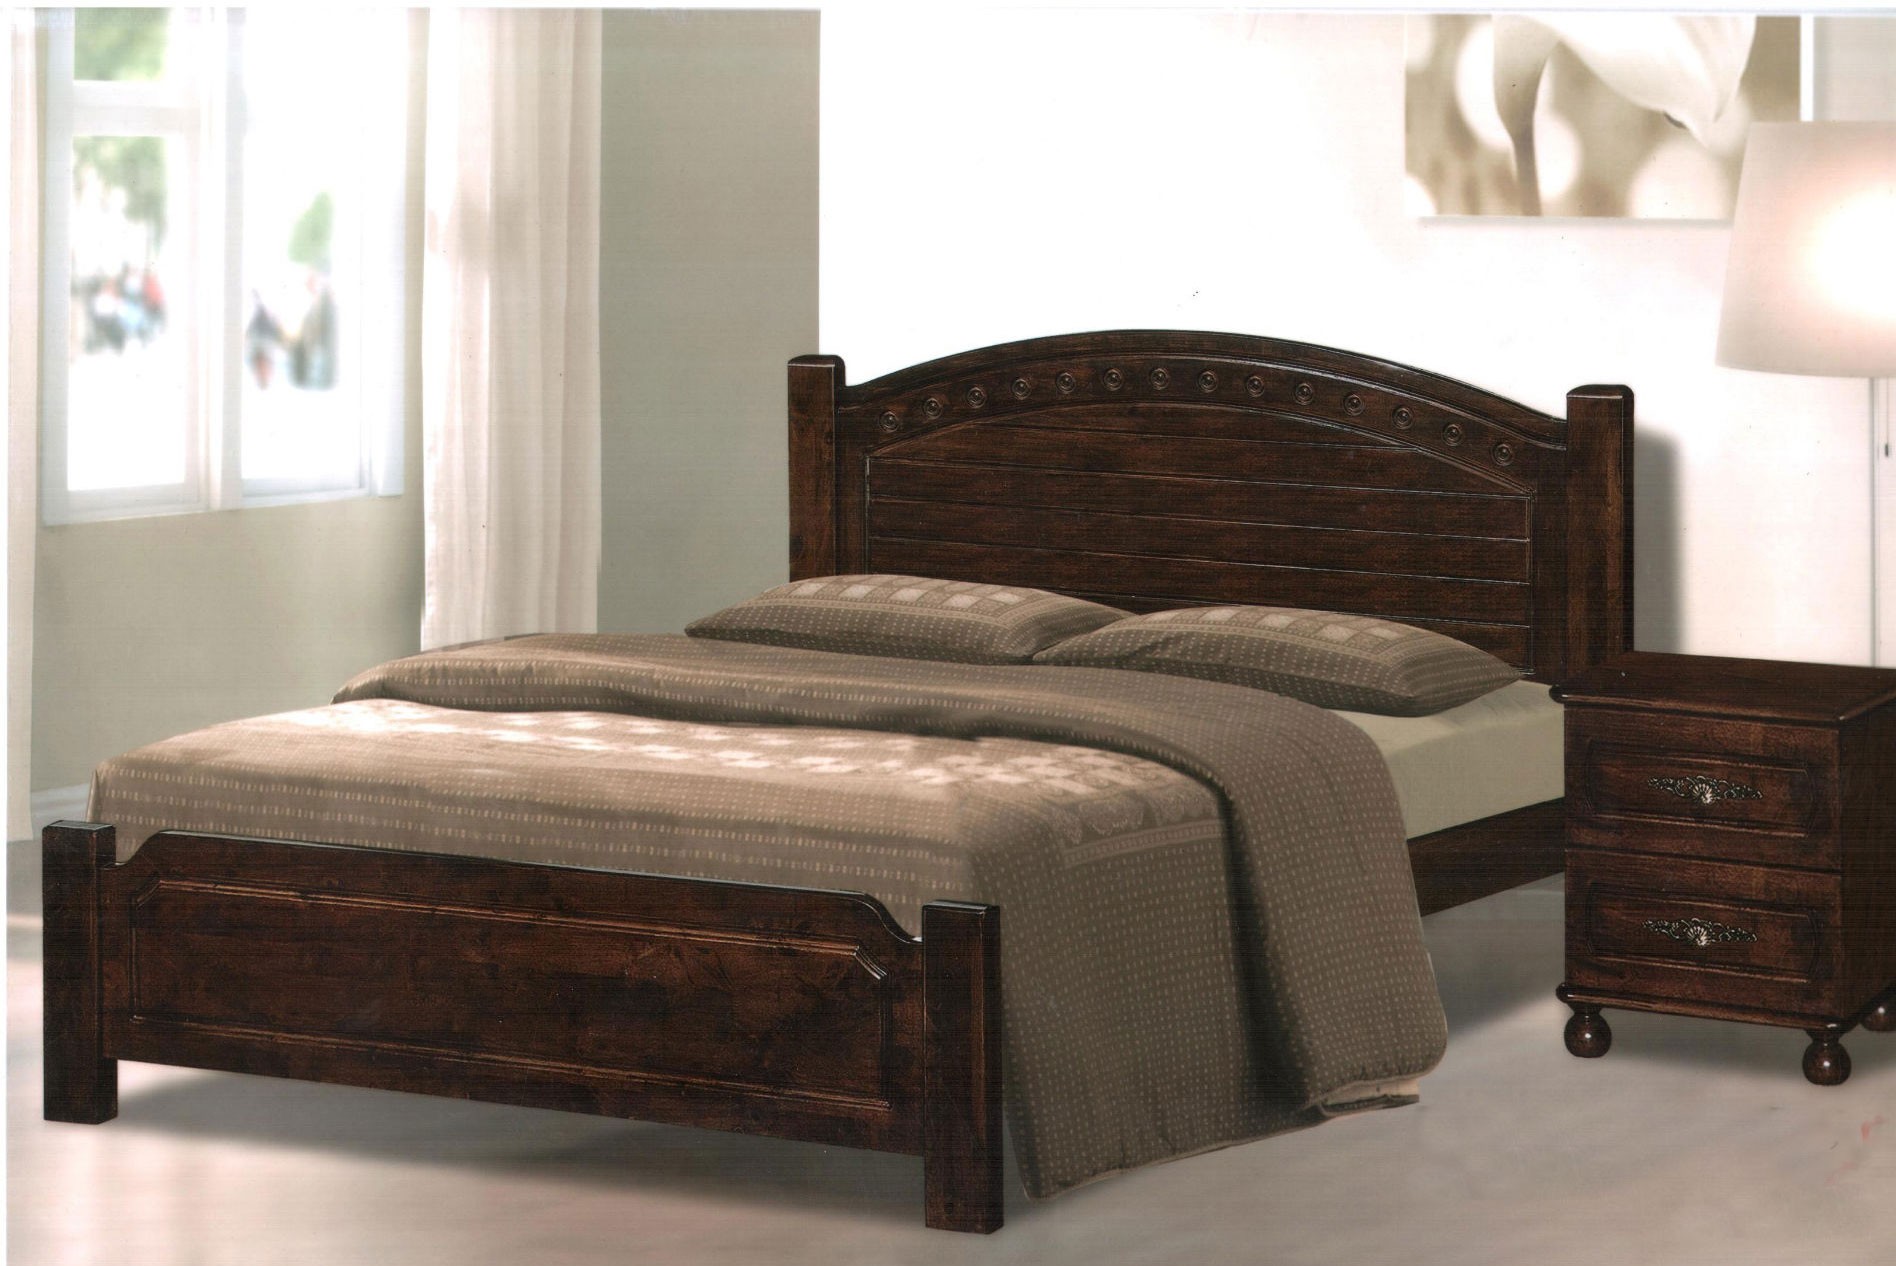 full size wooden bed frame with headboard dark lacquered mahogany wood full bed frame with arched headboard, XHILQZU